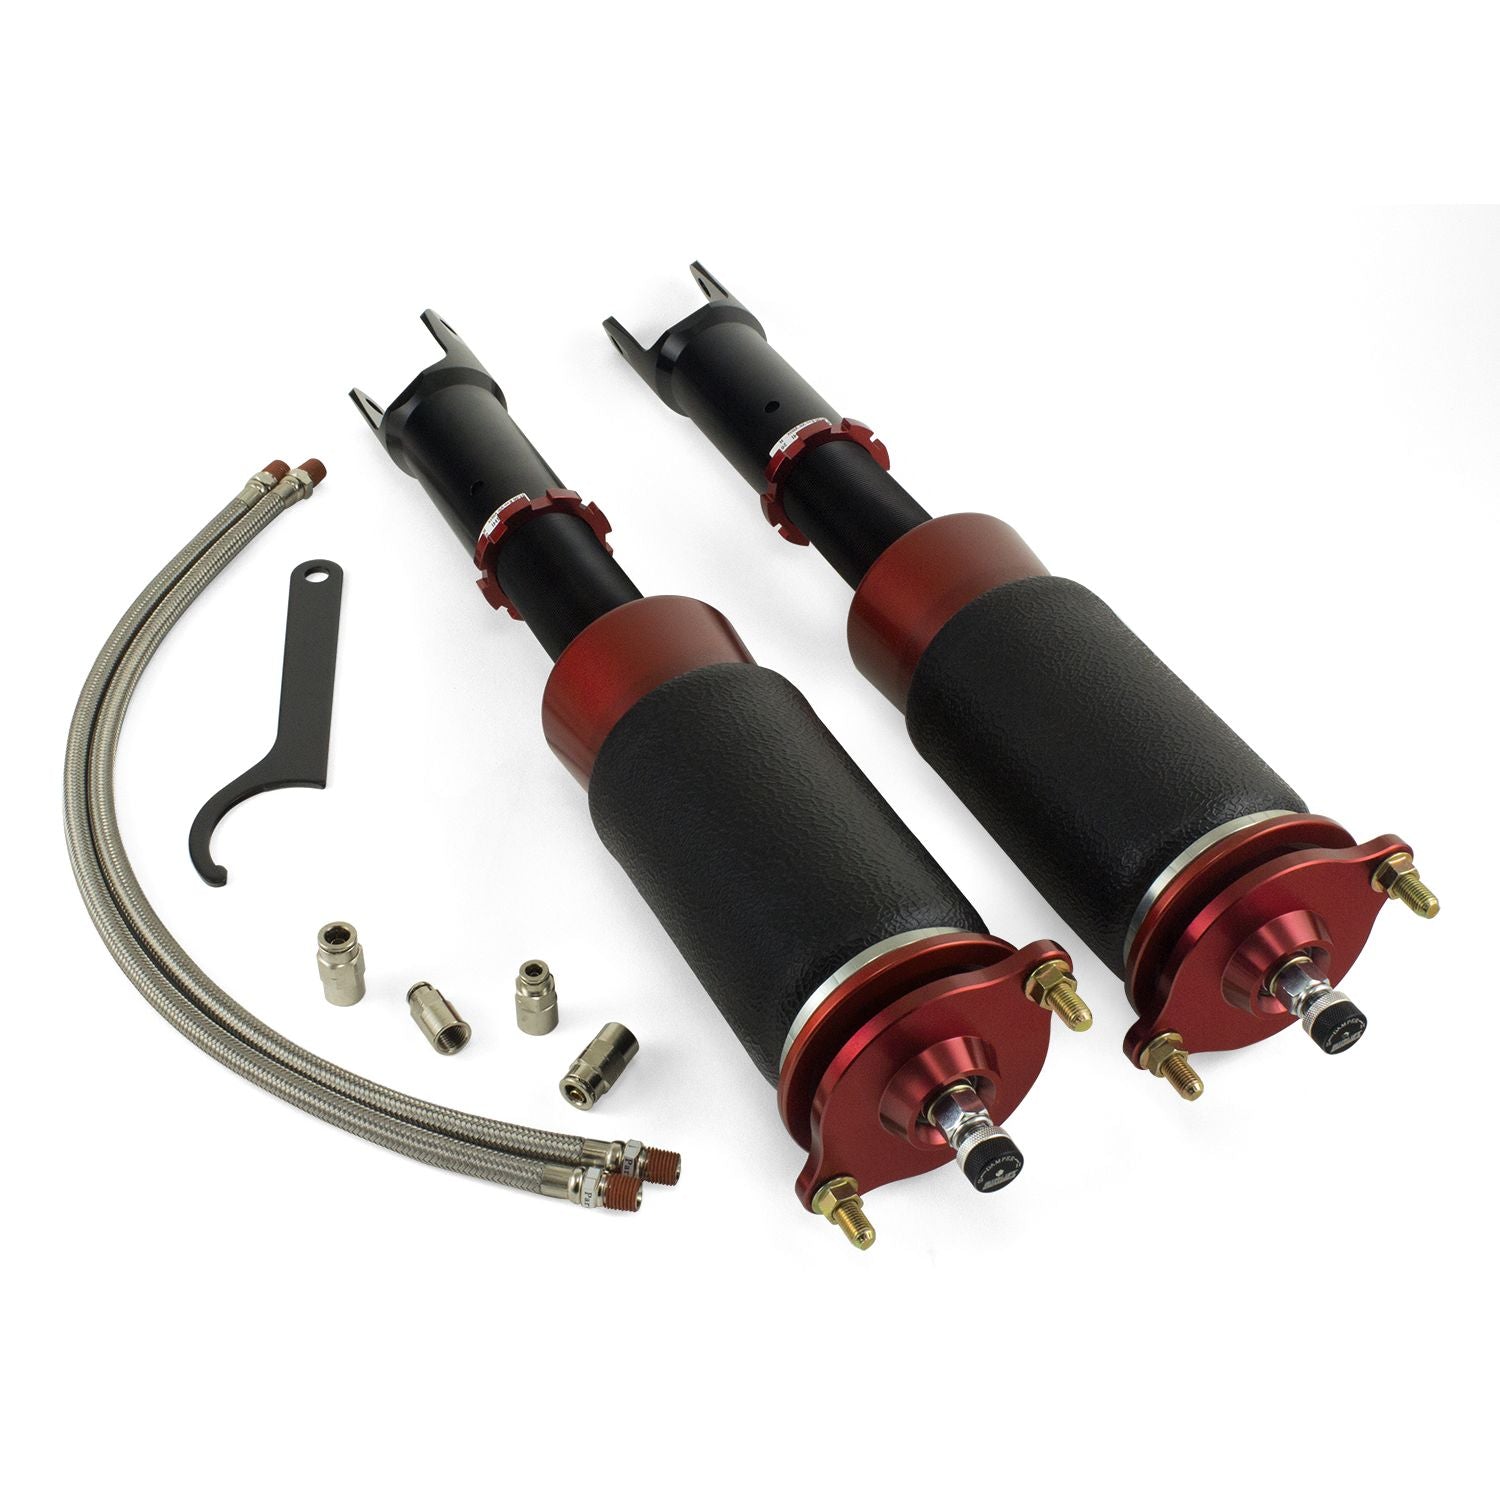 Get your 7th 8th and 9th gen Mitsubishi Evo slammed without sacrificing ride quality. Air Lift Performance air spring suspension gives you maximum drop with superior handling sharp steering response and a comfortable ride.